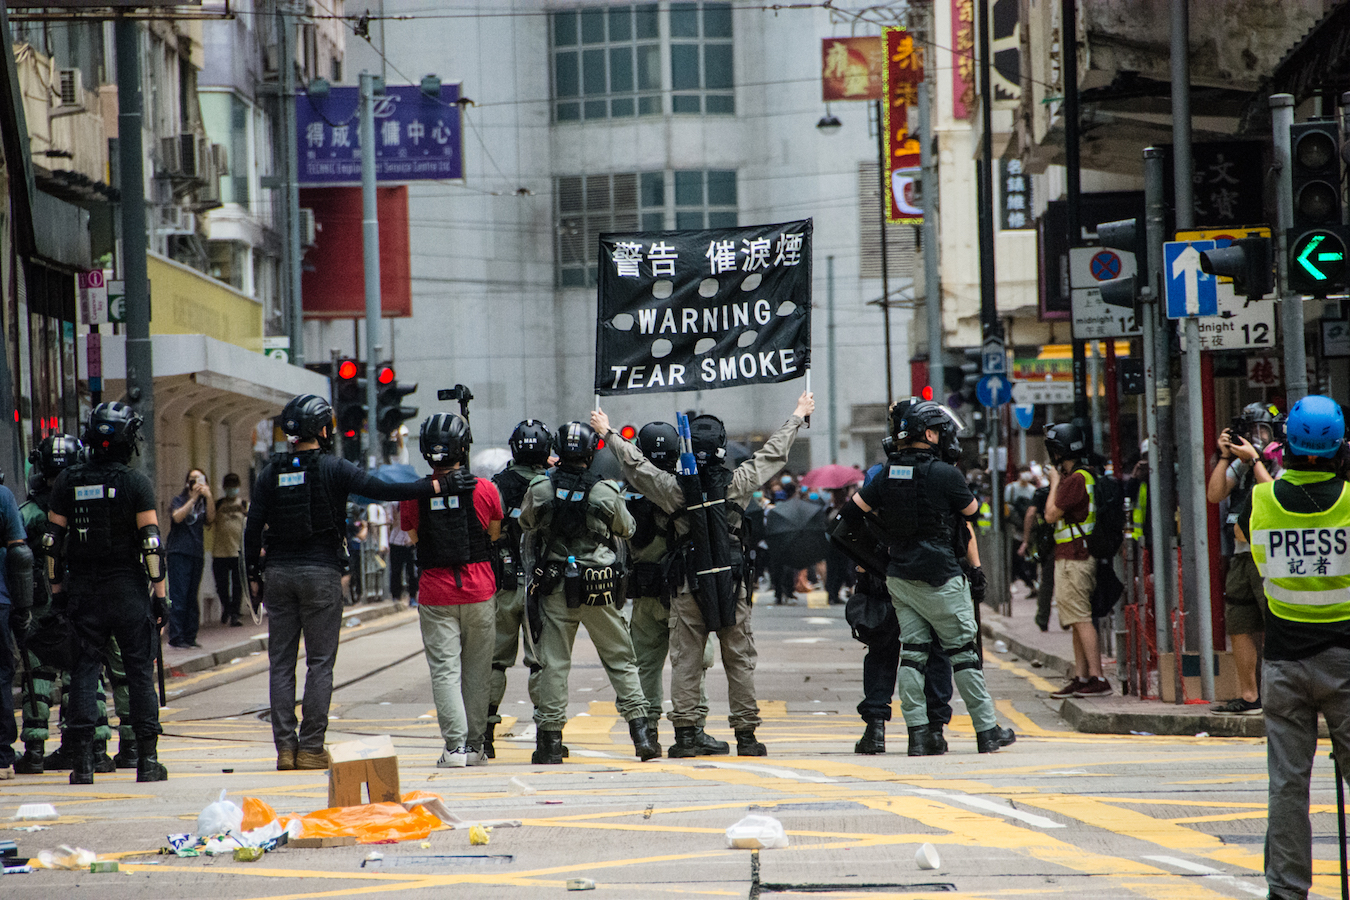 Familiar Cycle of Clashes as Protests Take Place in Hong Kong Against ...